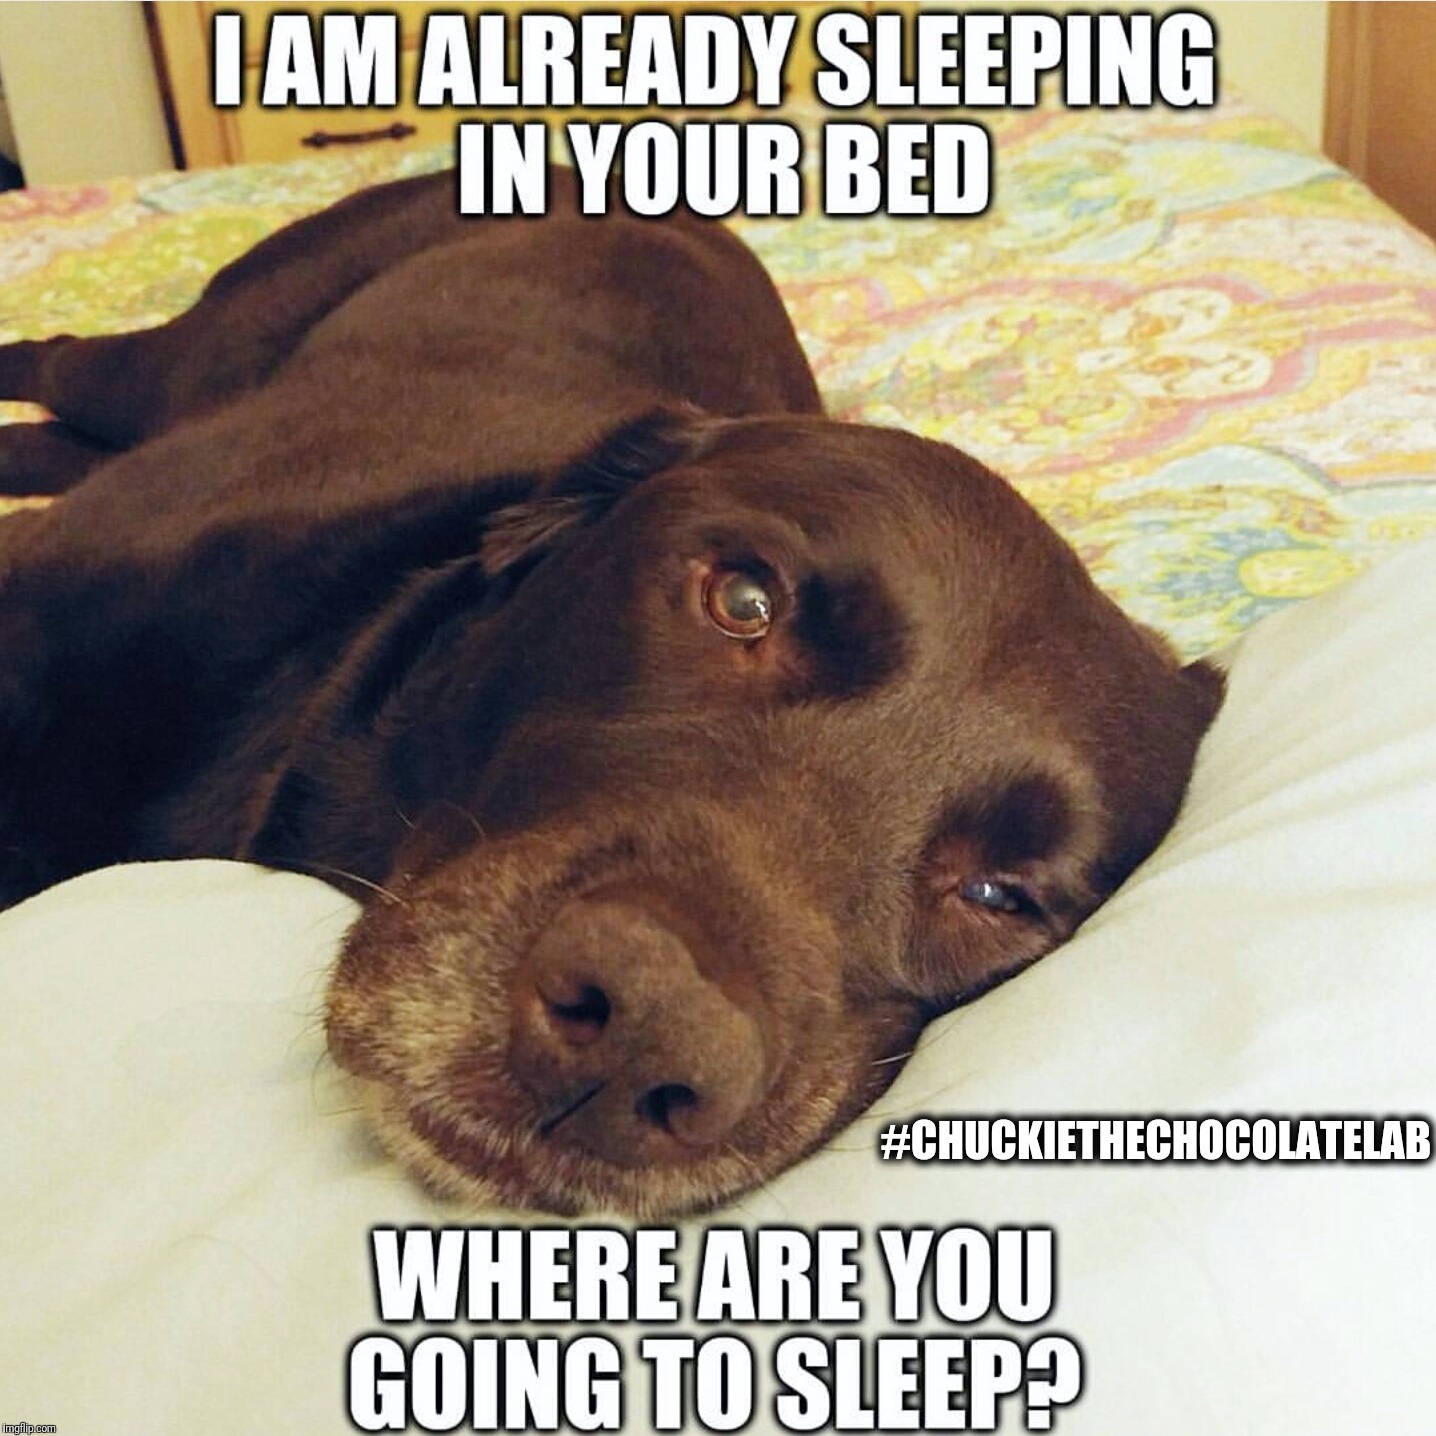 Where are you going to sleep?  |  #CHUCKIETHECHOCOLATELAB | image tagged in chuckie the chocolate lab,funny,dogs,memes,sleepy,bedtime | made w/ Imgflip meme maker